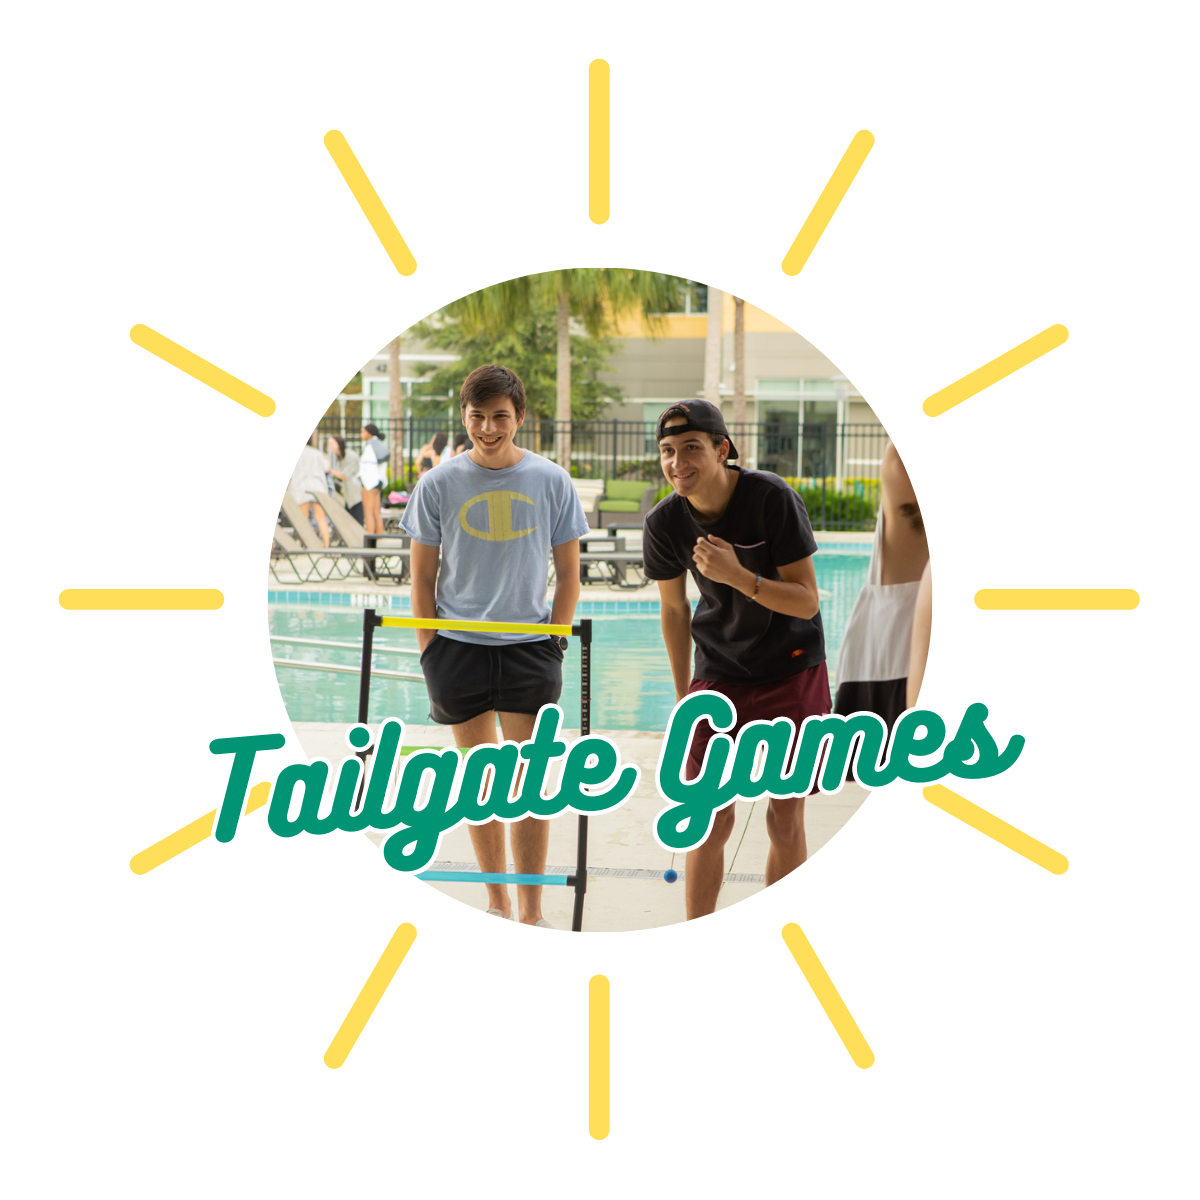 tailgate games